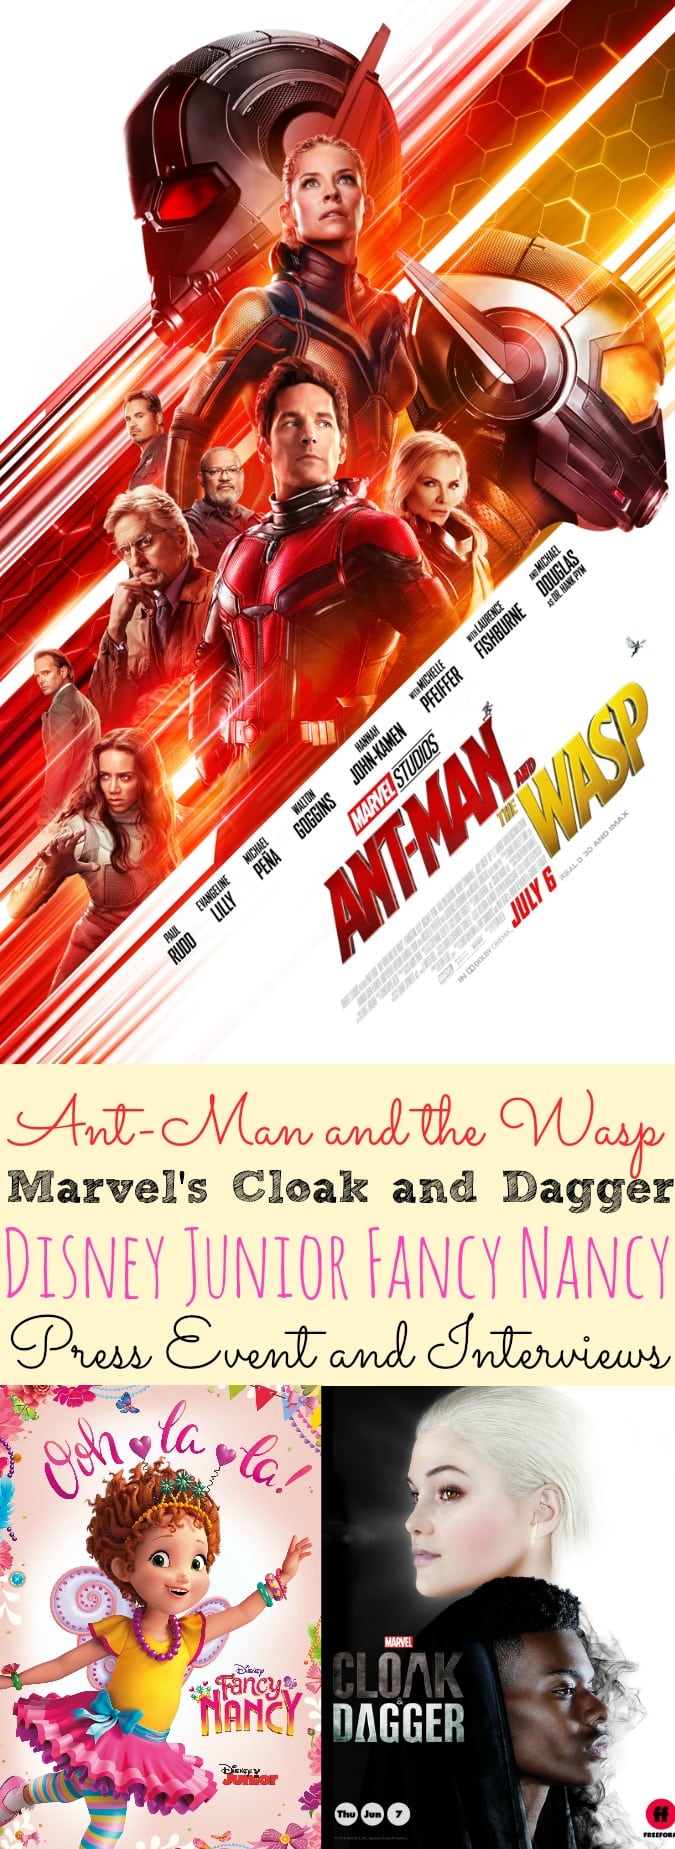 Ant-Man and the Wasp Press Junket